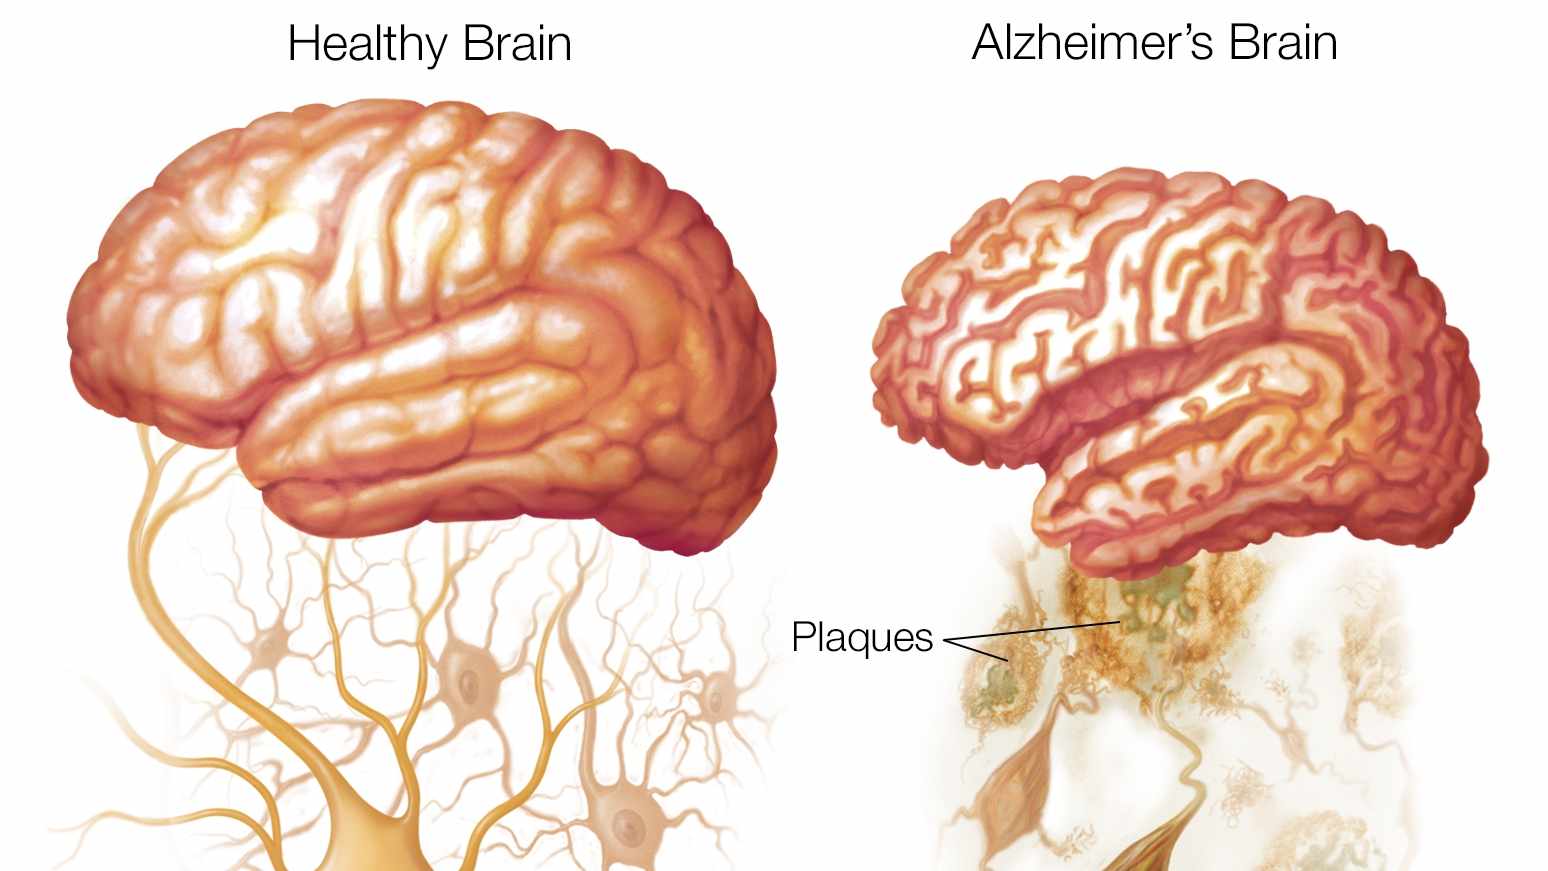 Illustration of a healthy brain and Alzheimer's brain